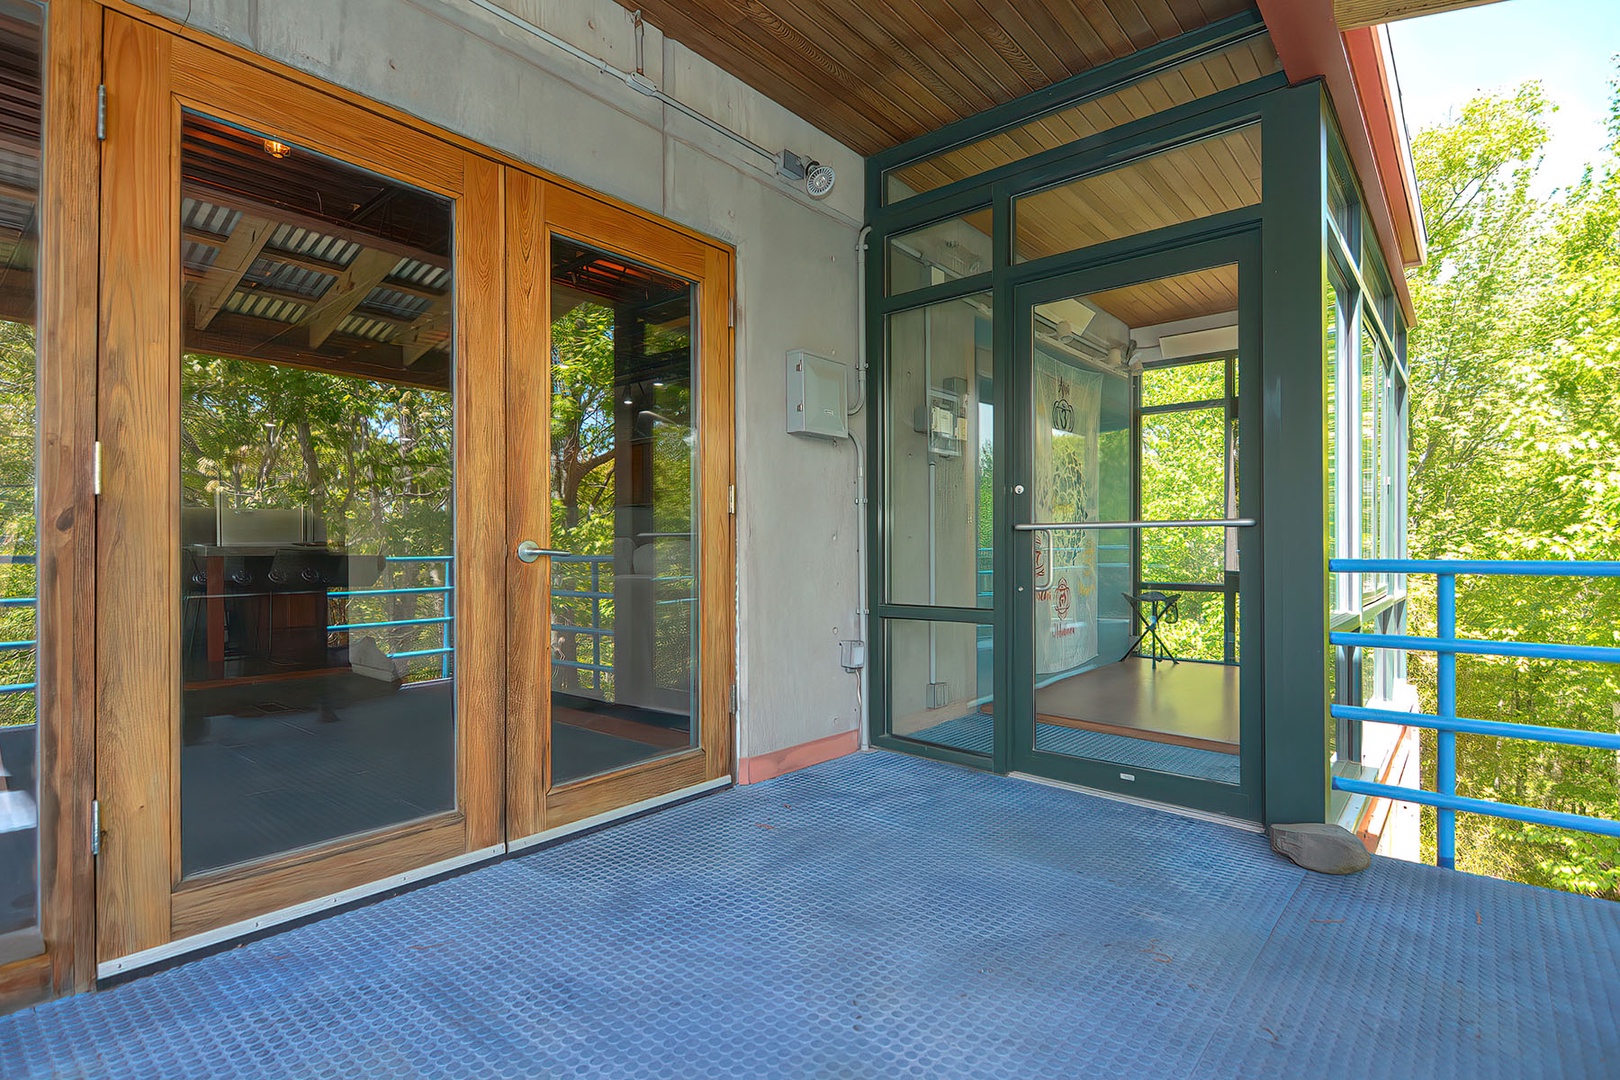 The yoga or meditation studio is accessed via the deck.